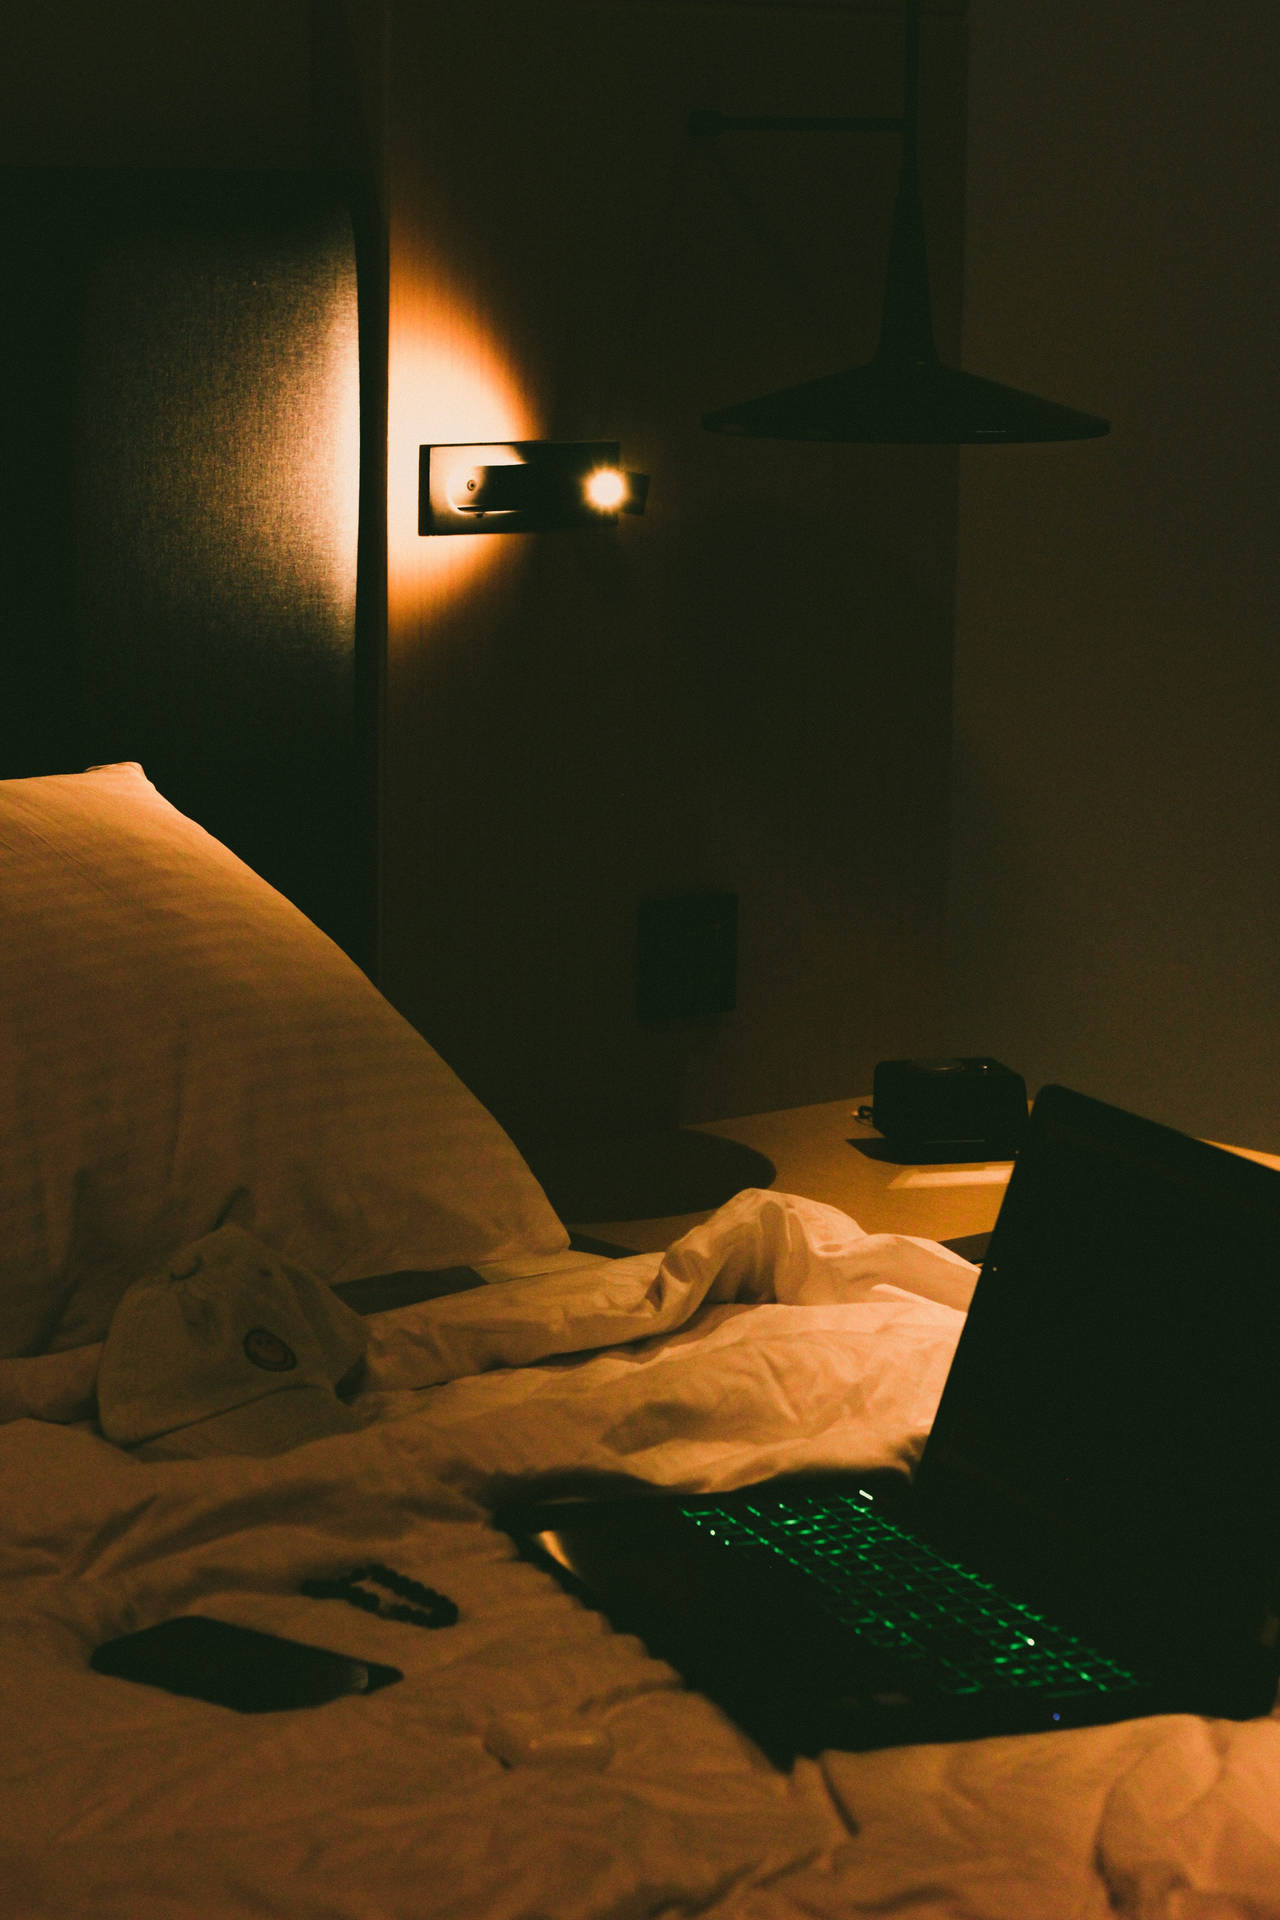 Aesthetic Tumblr Laptop Ambient Bedroom Background